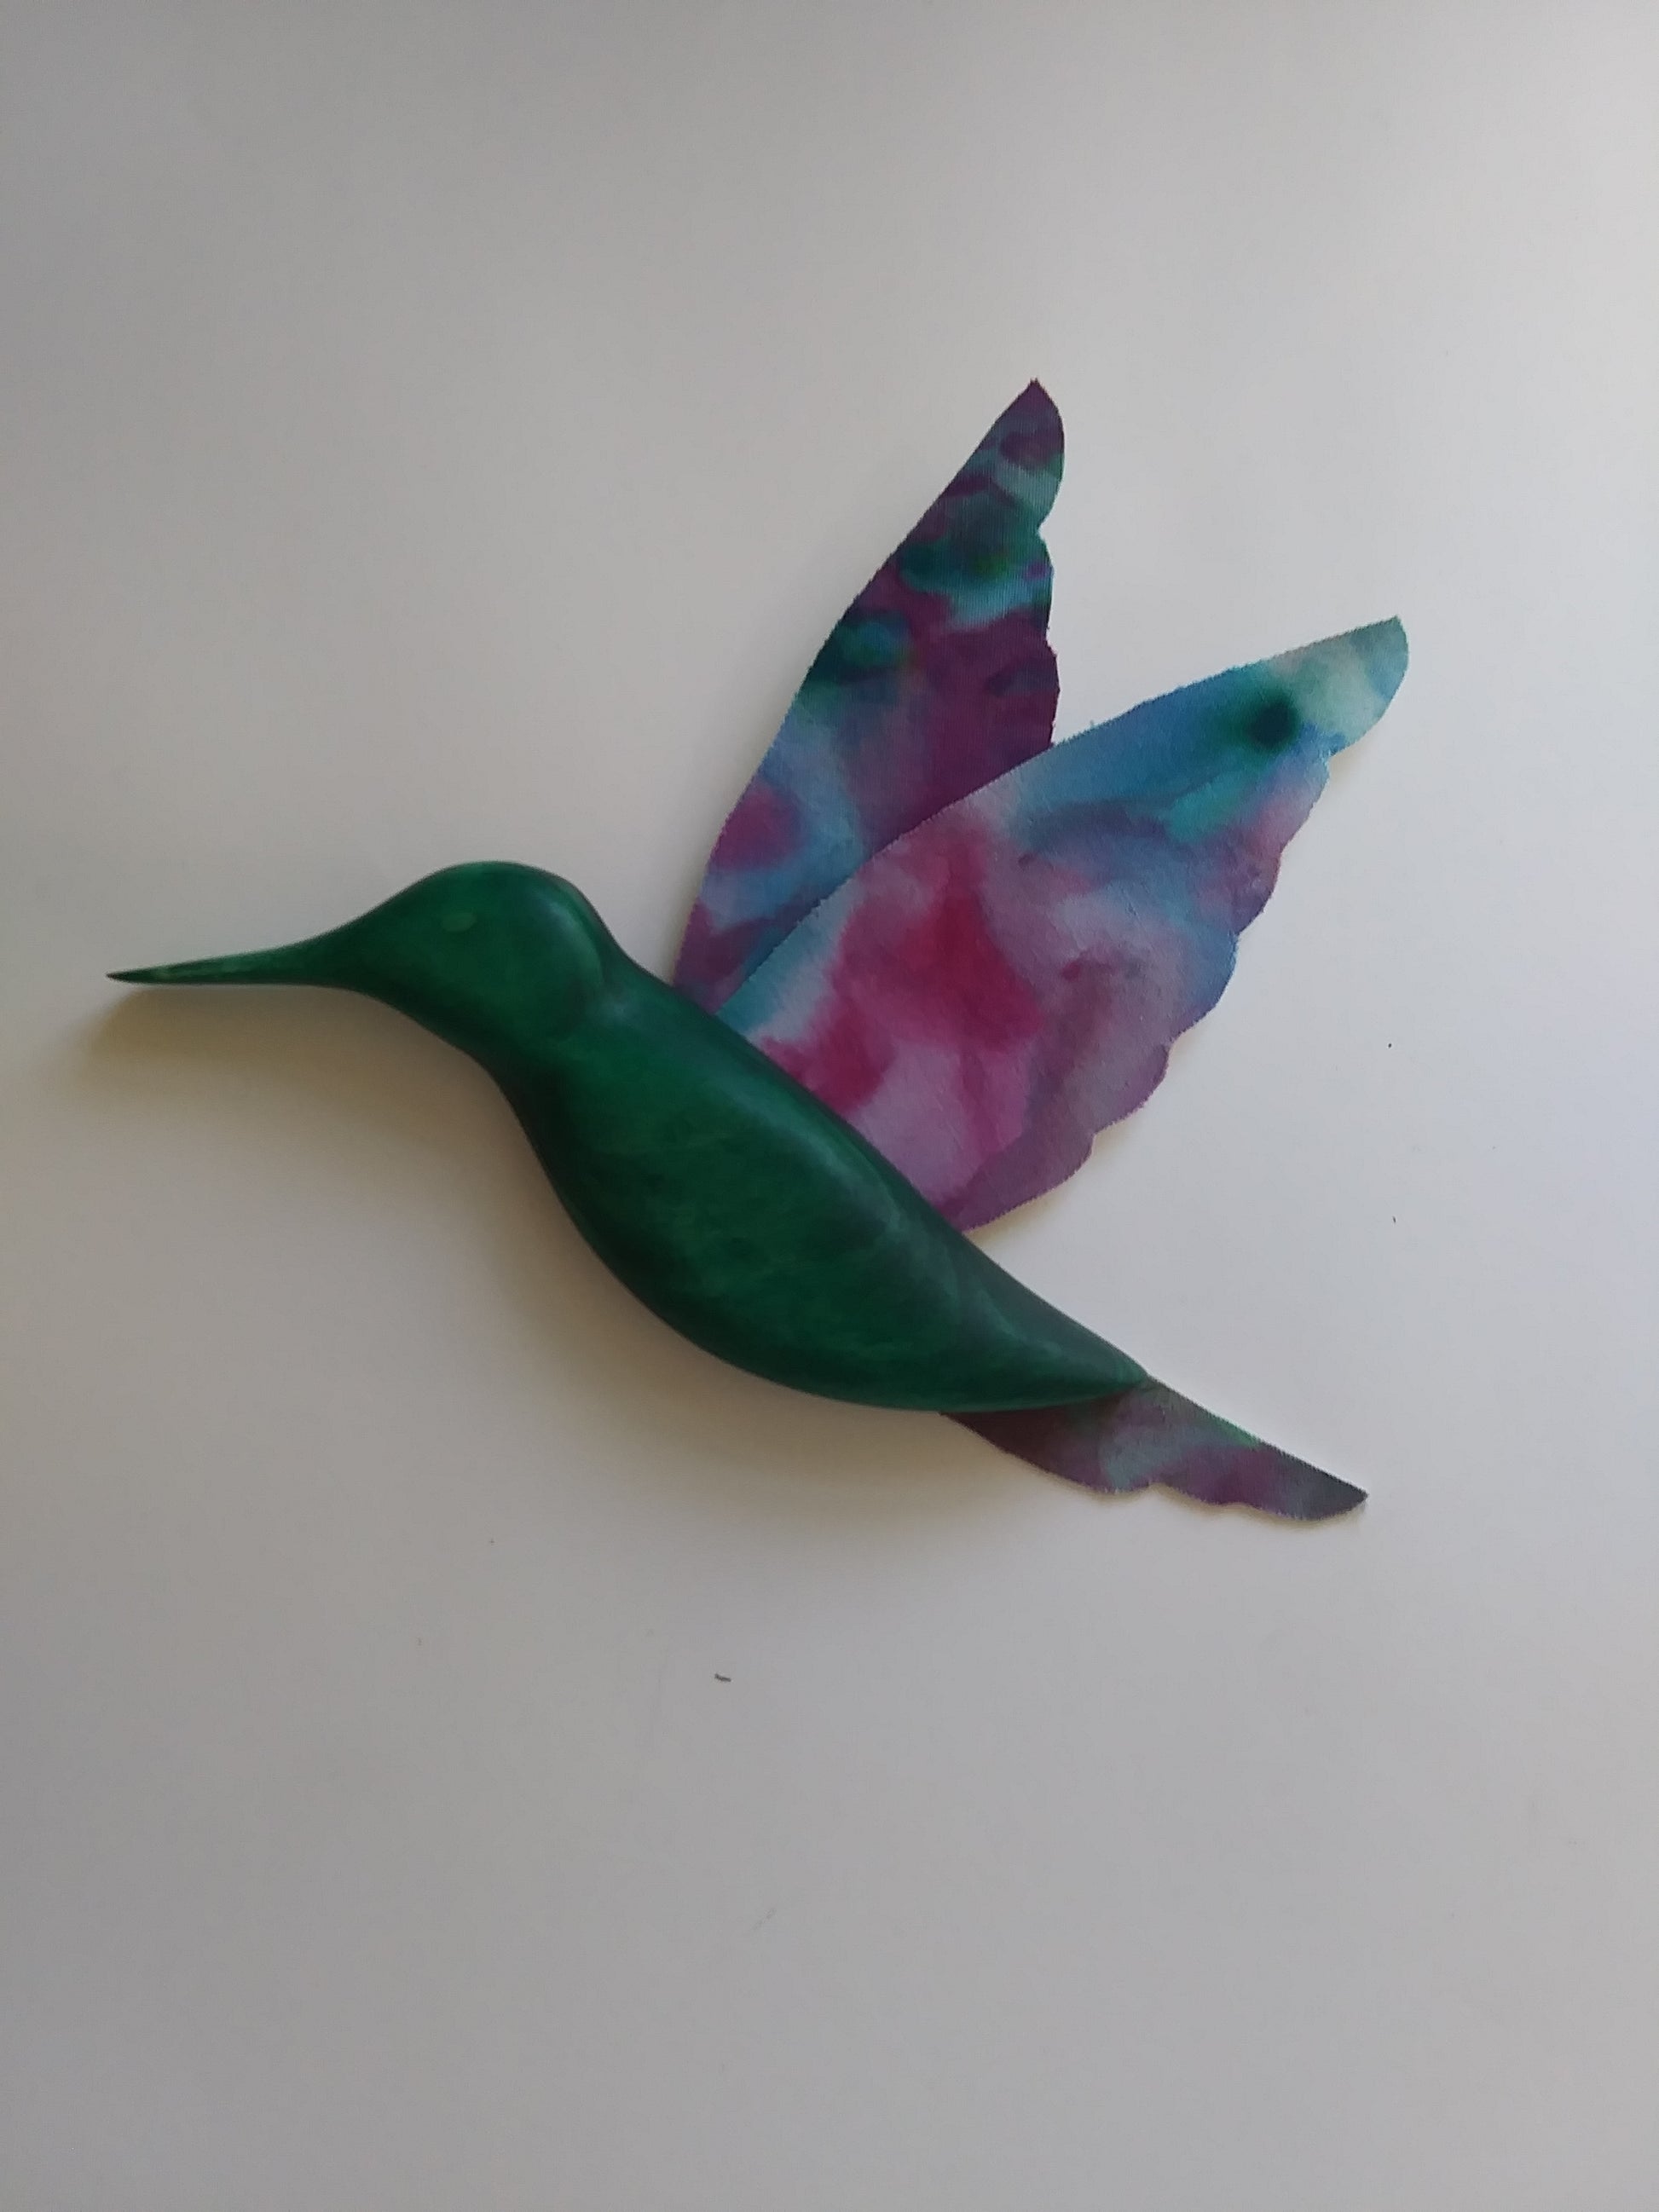 "Humming Bird" Green Tye Dye Bird Stained Glass Artist: Bruce Allemani  Green wood body with Tye dye wings and tail of the humming bird  8" long x  5" wide x  1"  Would look great hanging in a living room or a window  Please note, each piece is custom designed by the Artist , with a slight variation between each piece